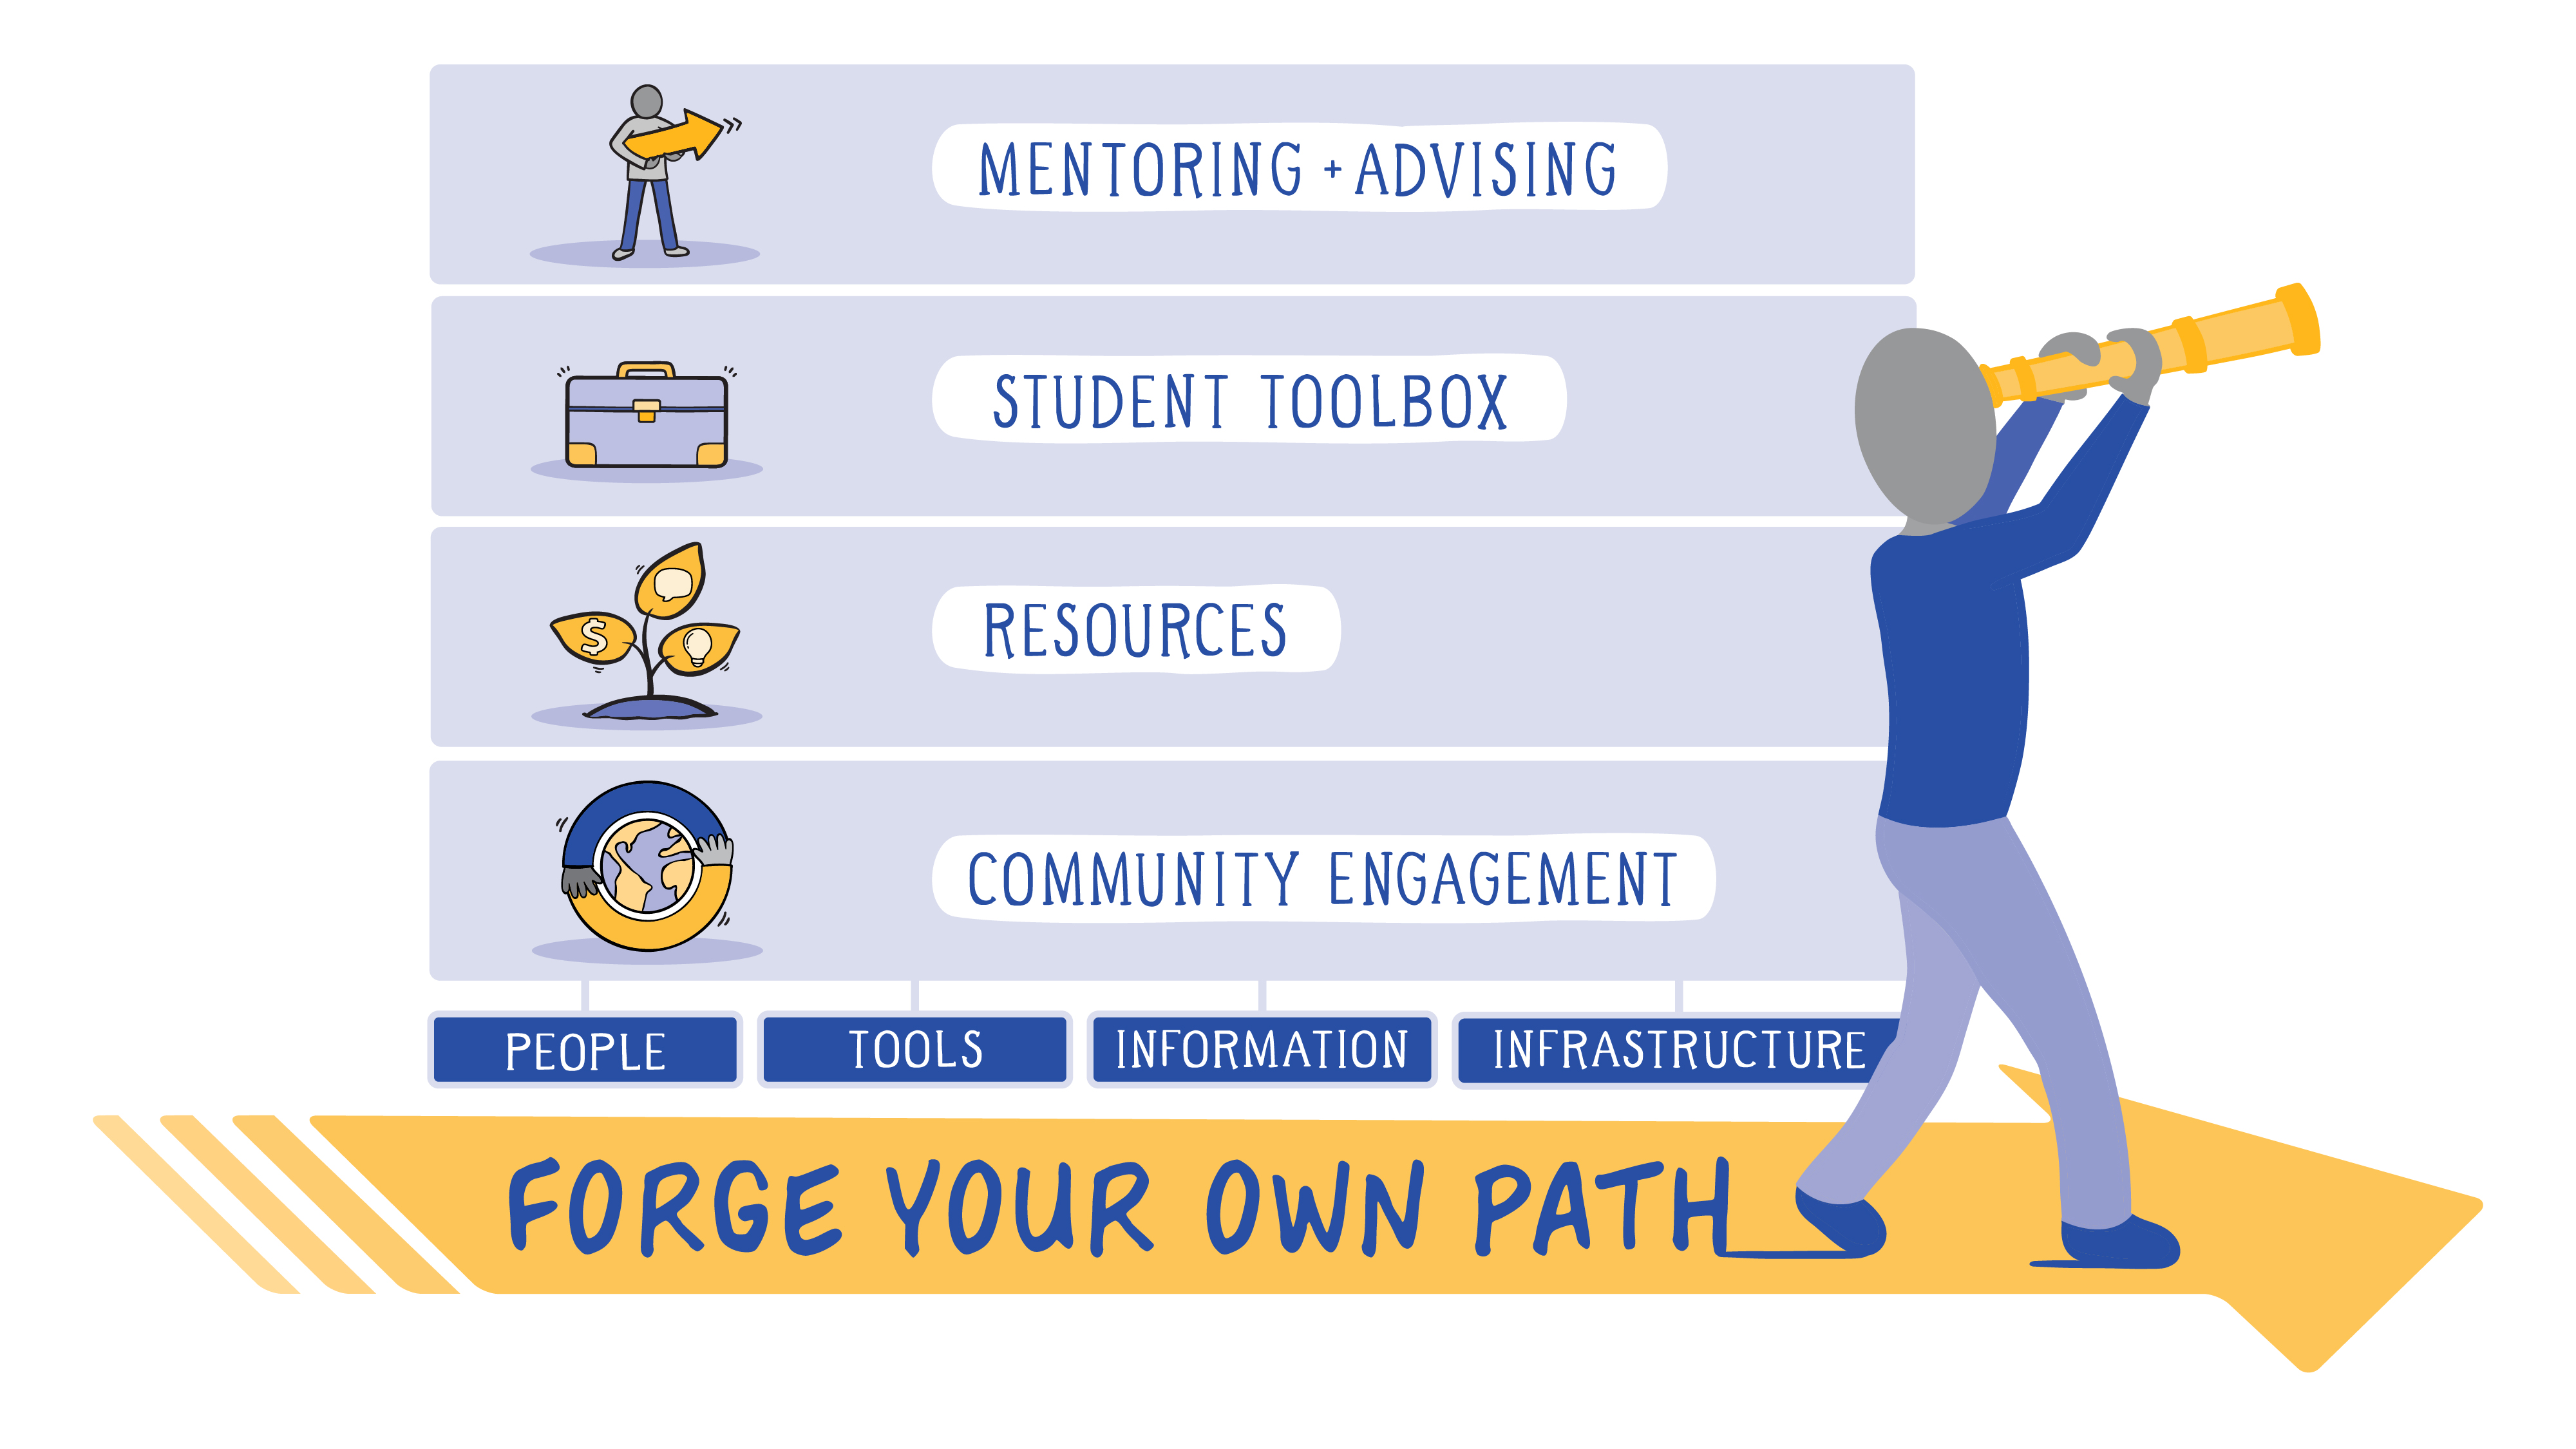 Mentoring and Advising, Student Toolbox, Resources, Community Engagement, People, Tools, Information, Infrastructure, Forge Your Own Path